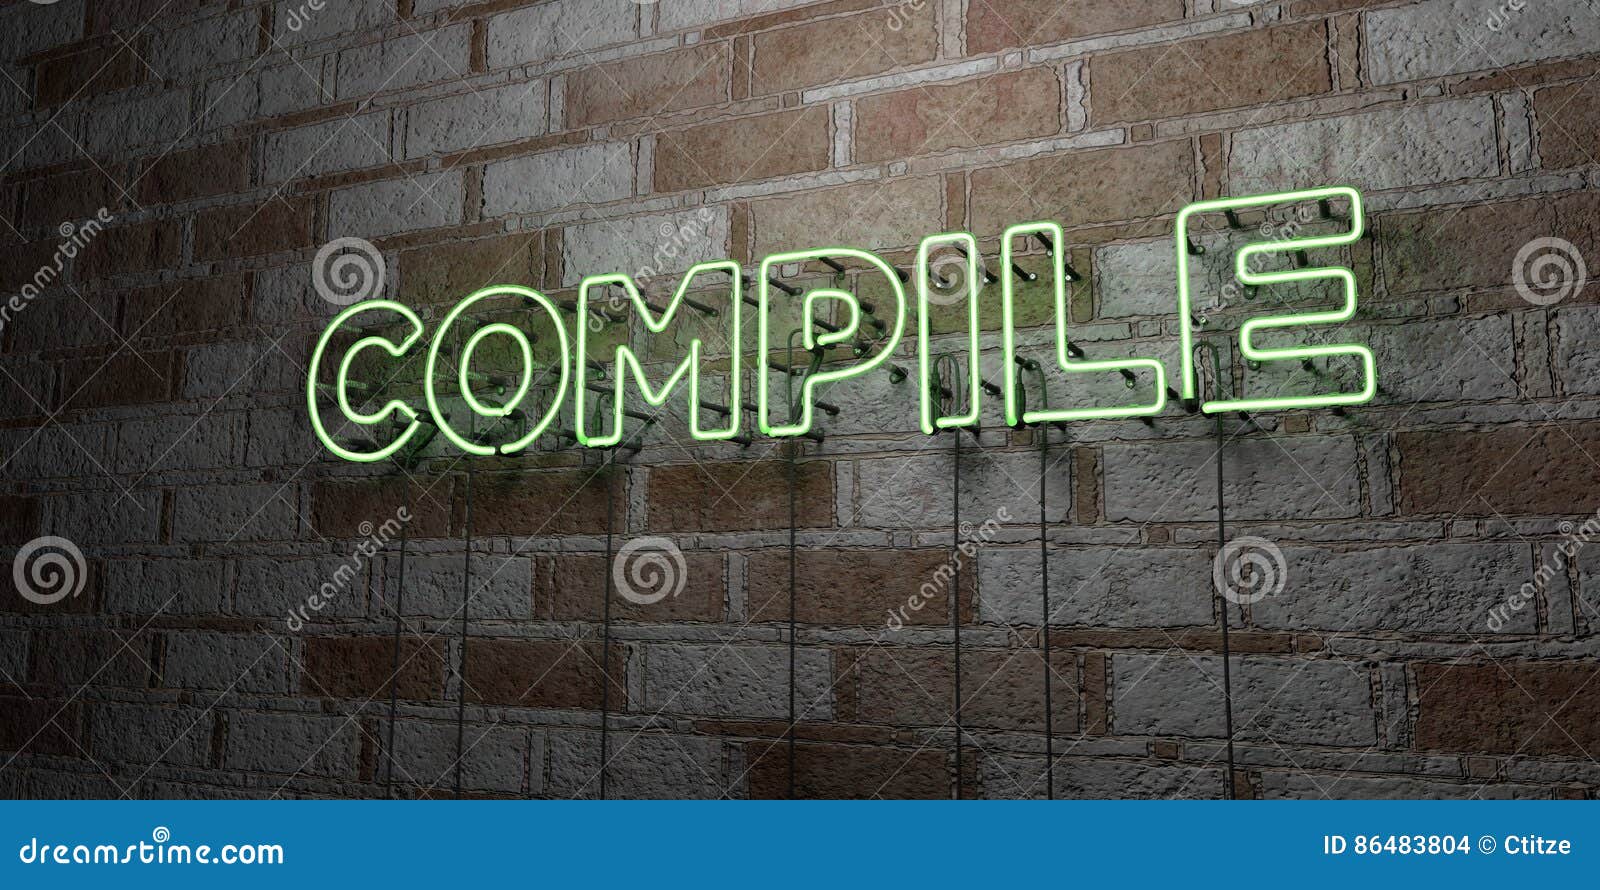 compile - glowing neon sign on stonework wall - 3d rendered royalty free stock 